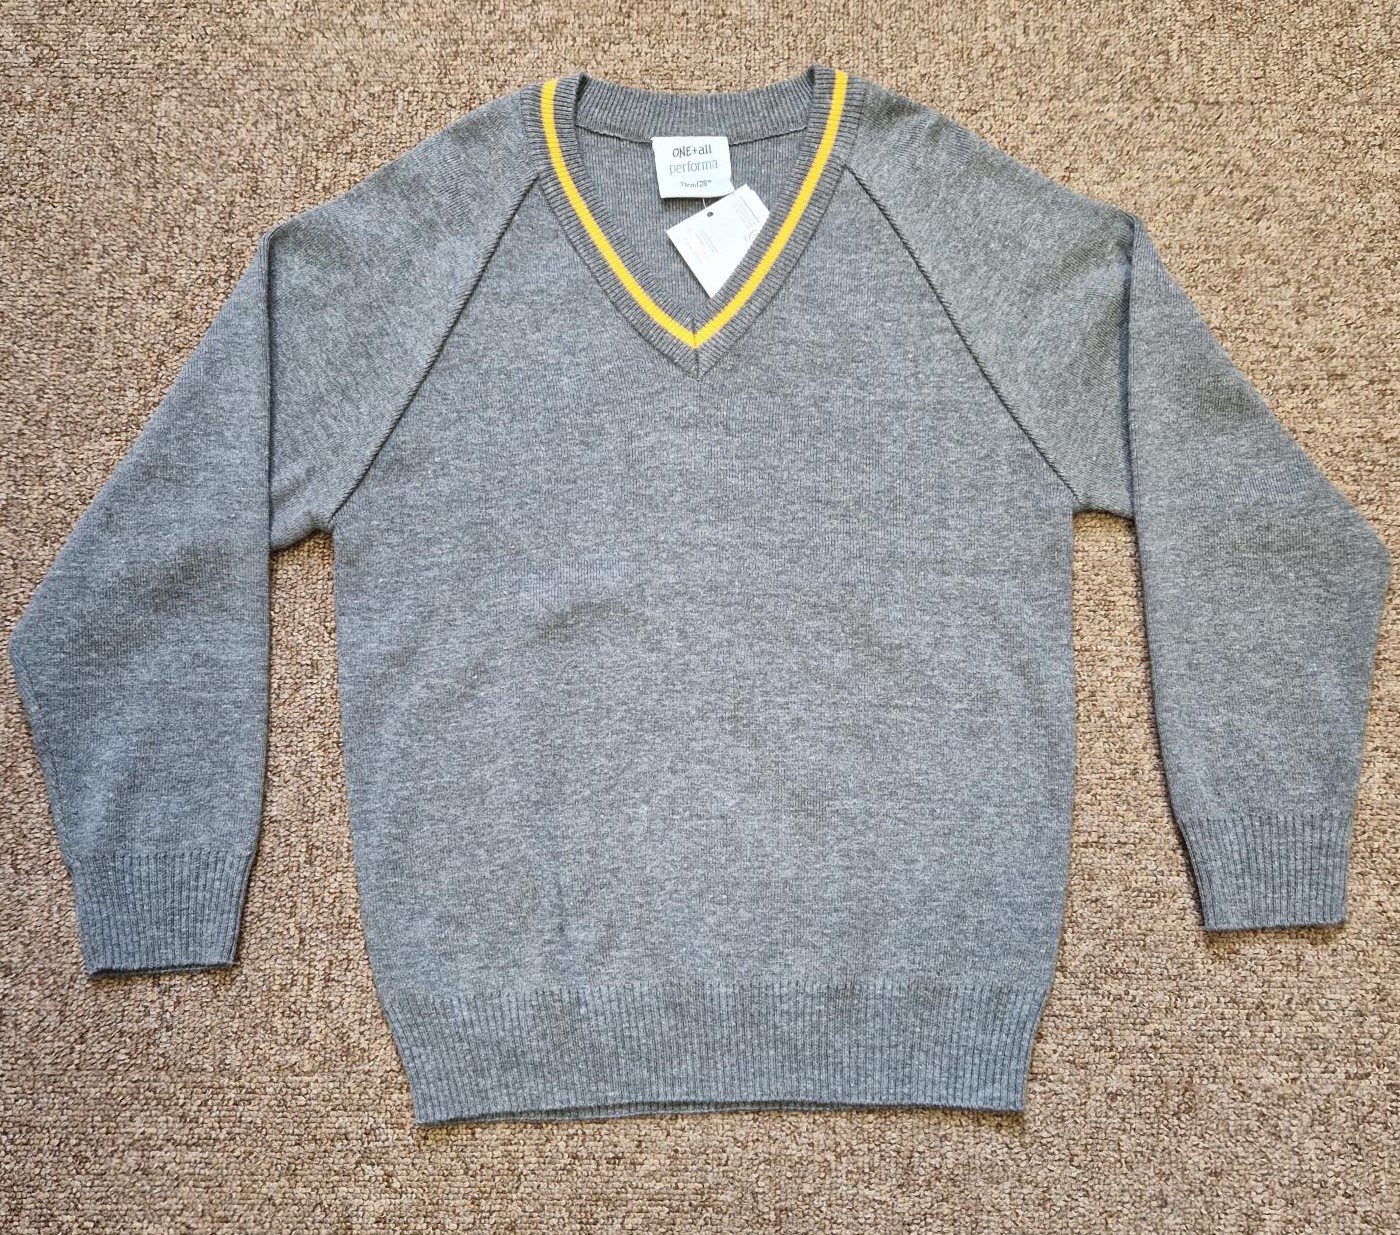 Grey V Neck Jumper With Gold Band - Years 4 to 9 !!!!! SALE 1/3 OFF ...